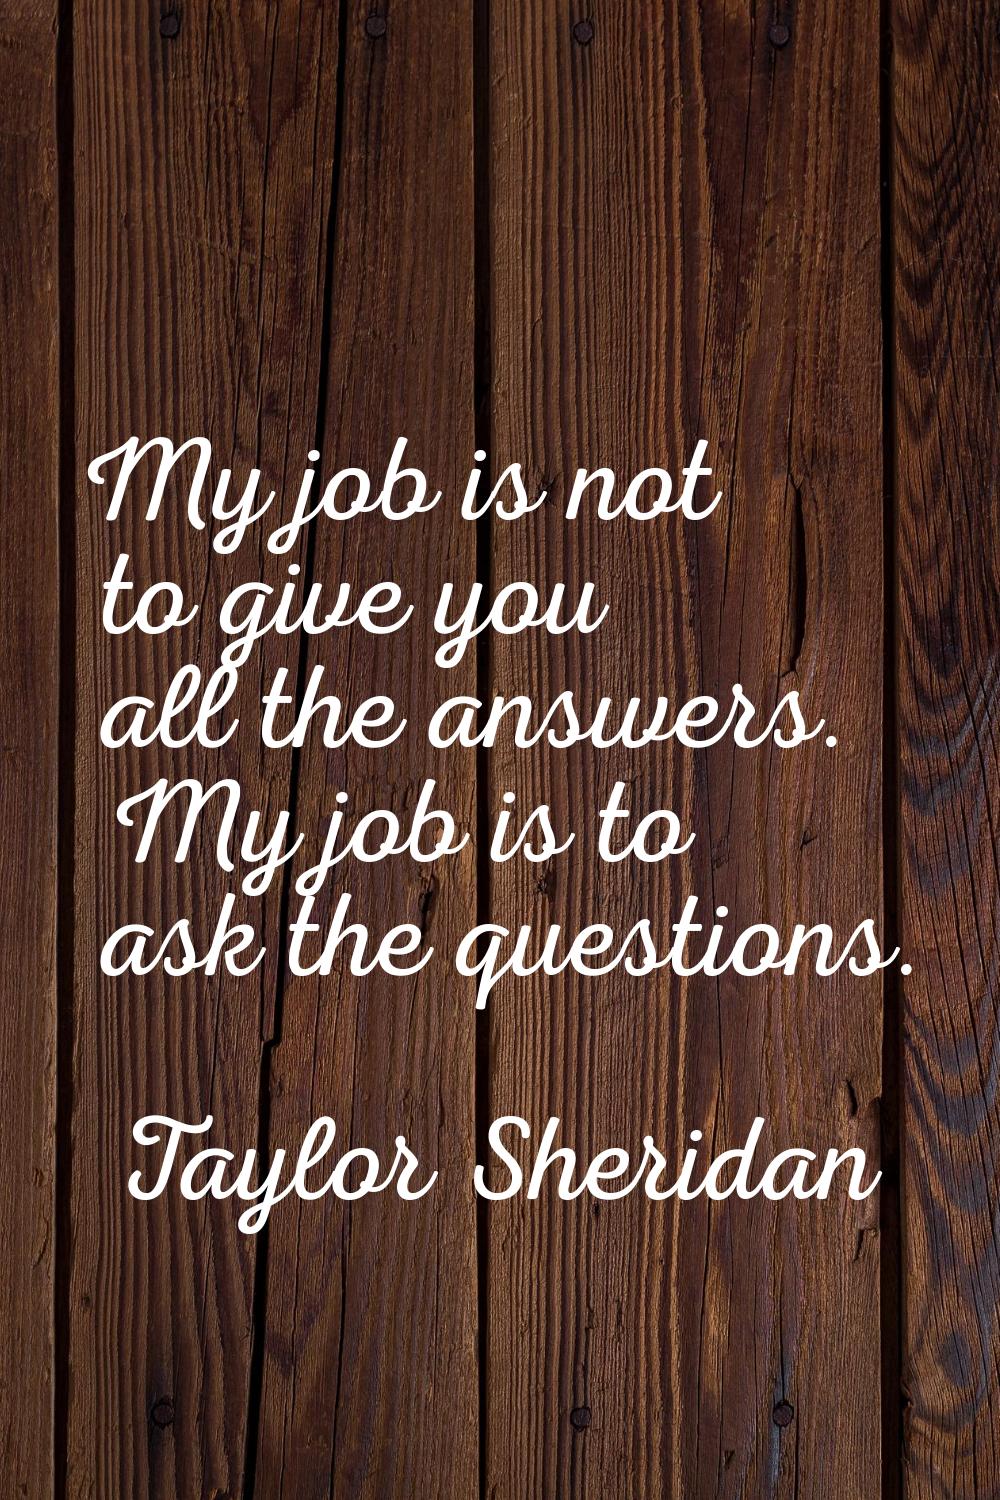 My job is not to give you all the answers. My job is to ask the questions.